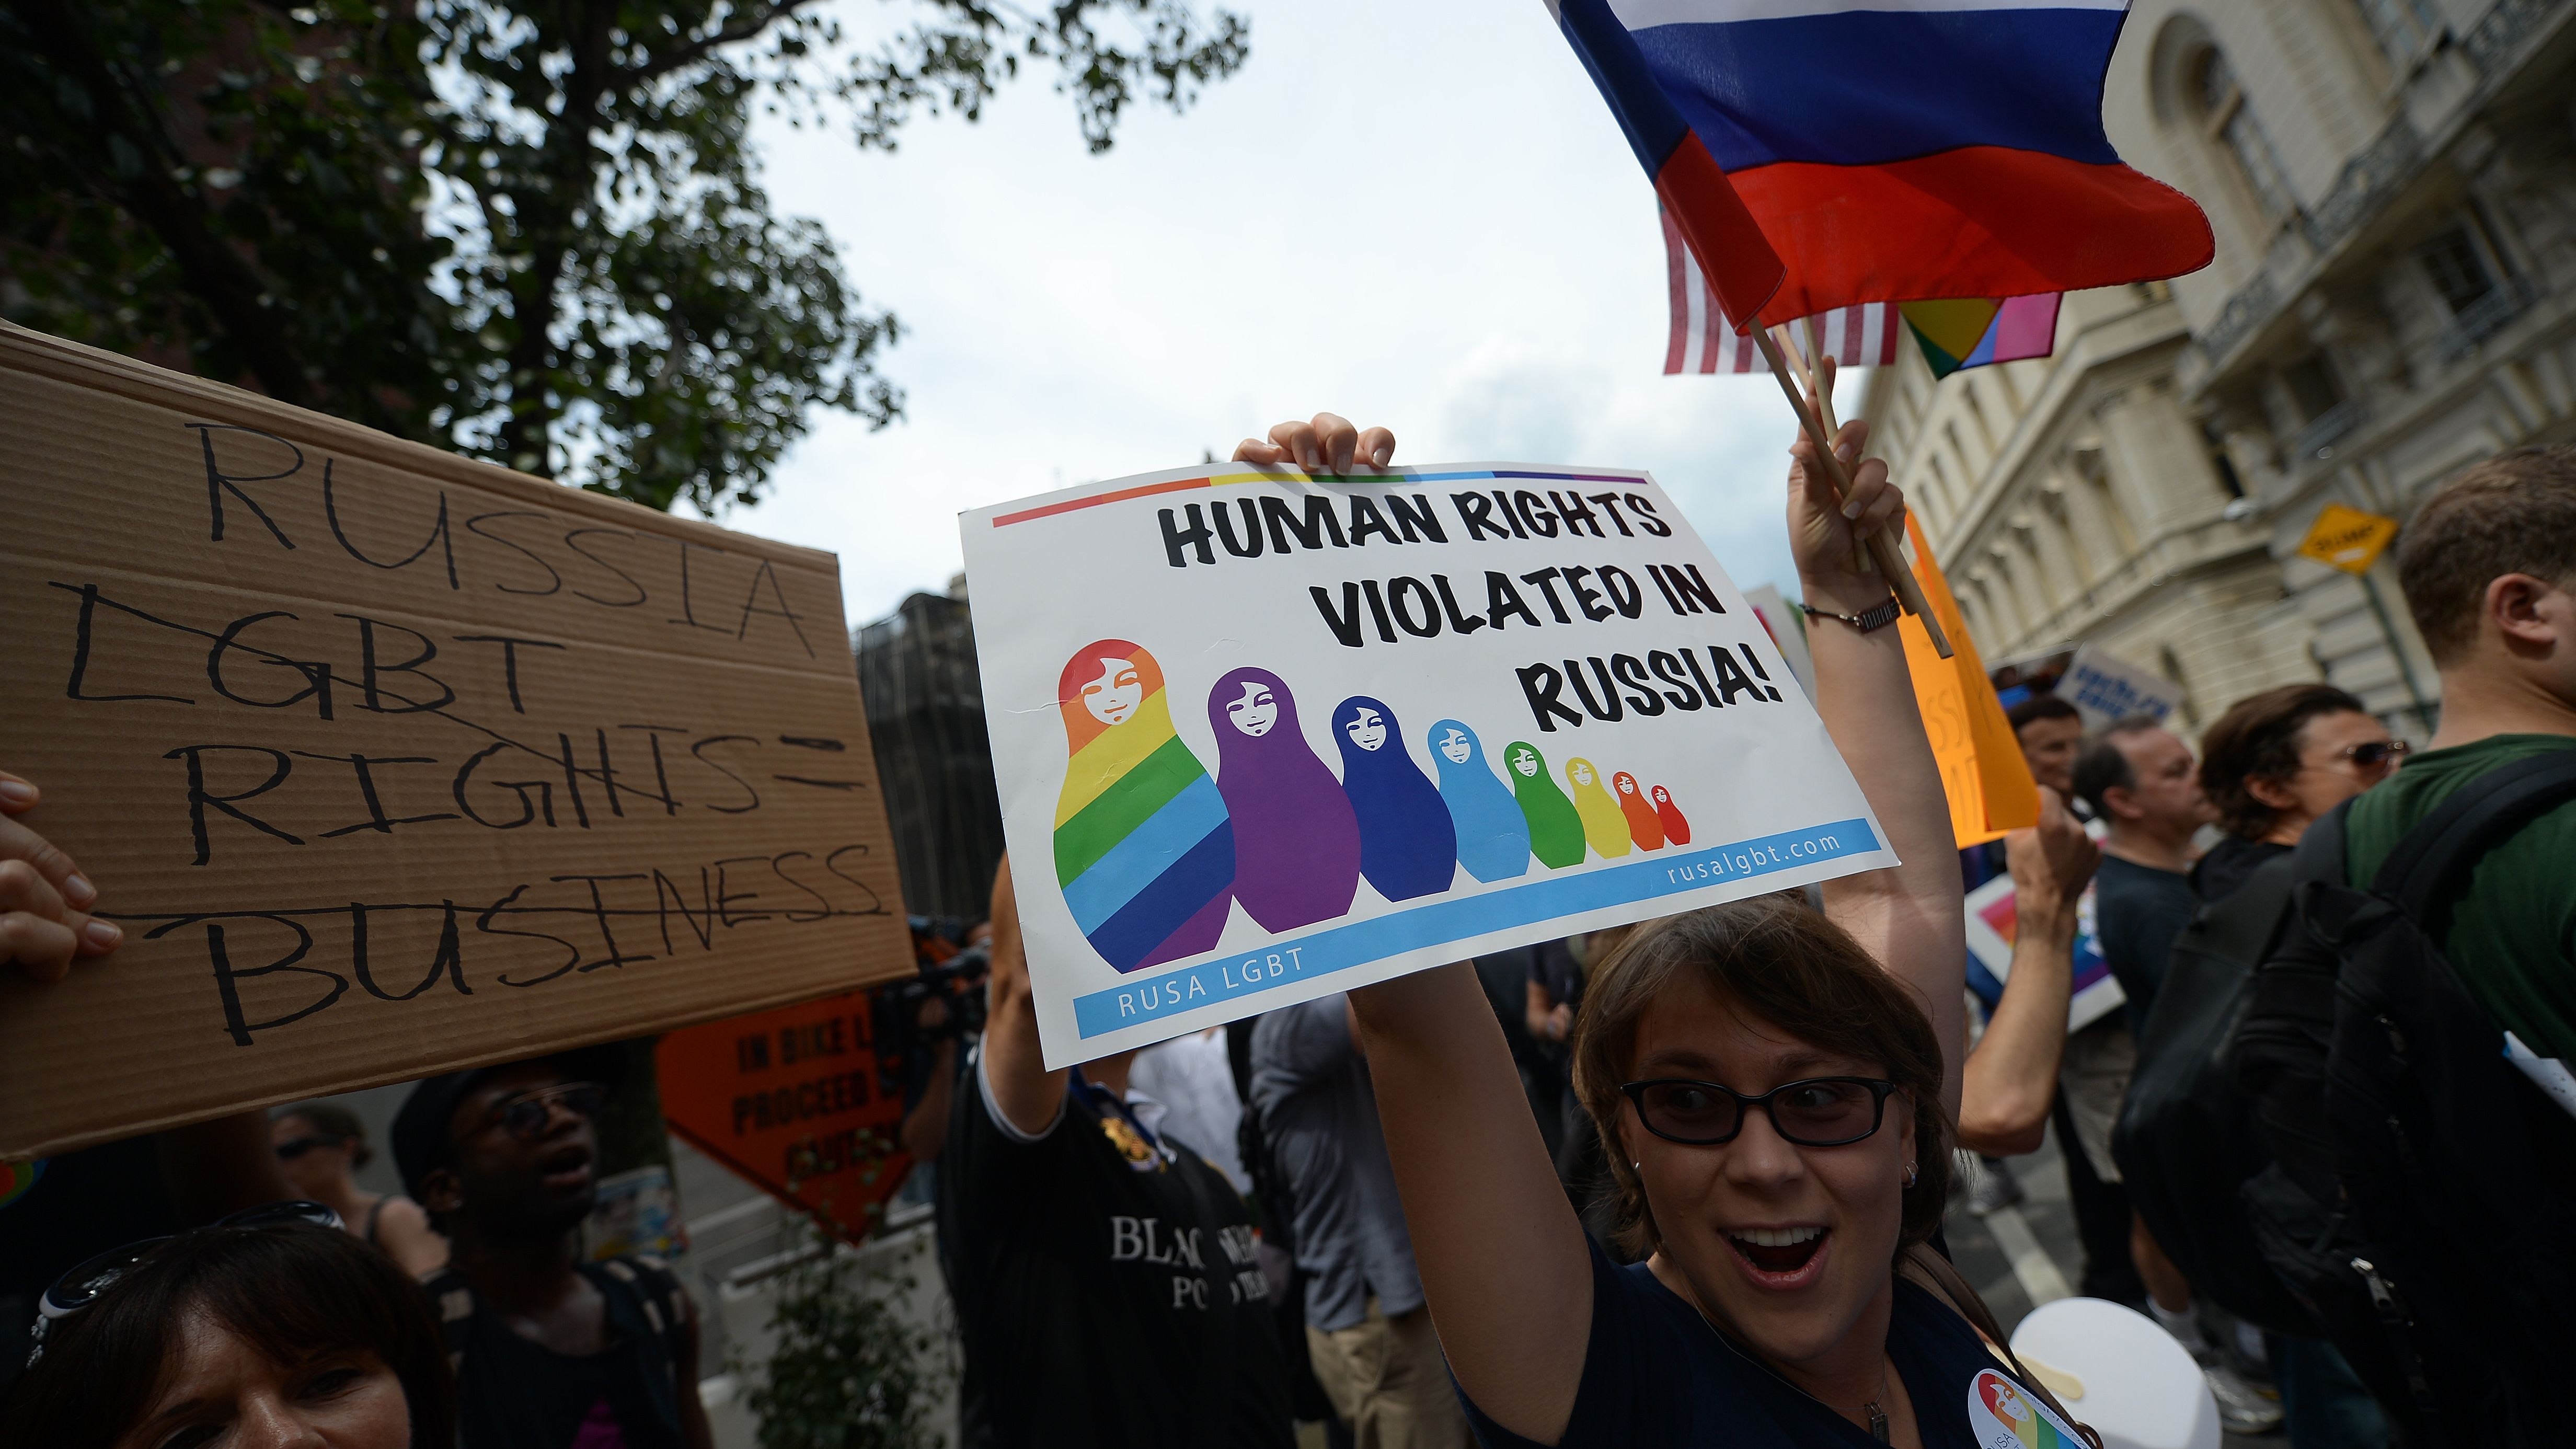 Protesters call for Russia to repeal its anti-gay laws before the 2014 Winter Olympics on Wednesday in New York.